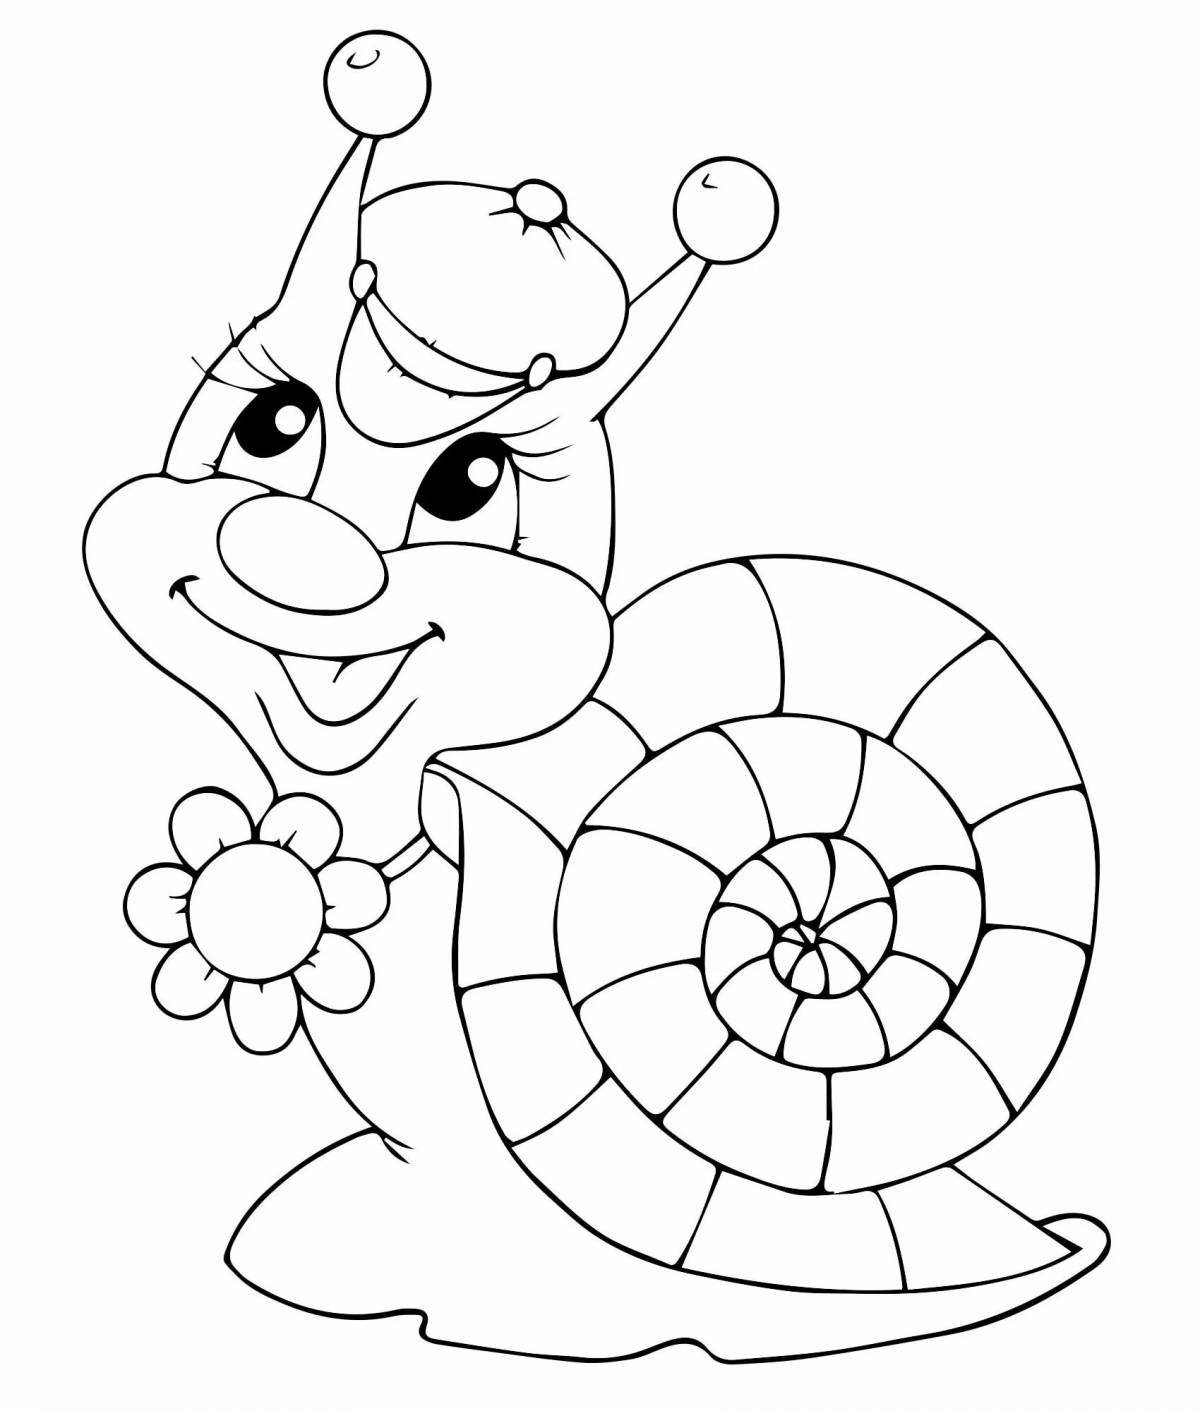 Relaxing snail coloring book for children 5-6 years old